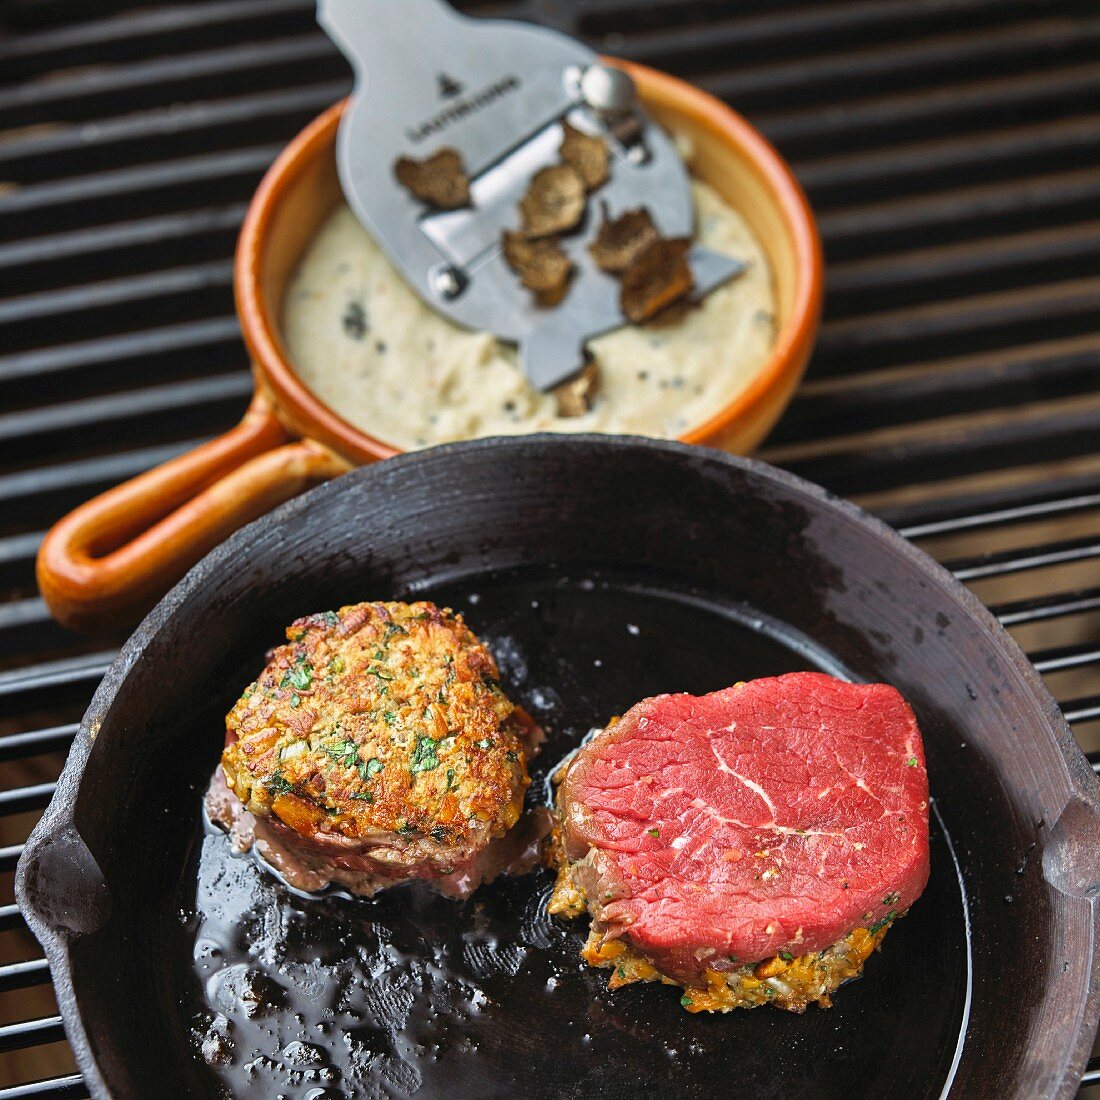 Beef steak with a cheese and herb crust and truffled polenta